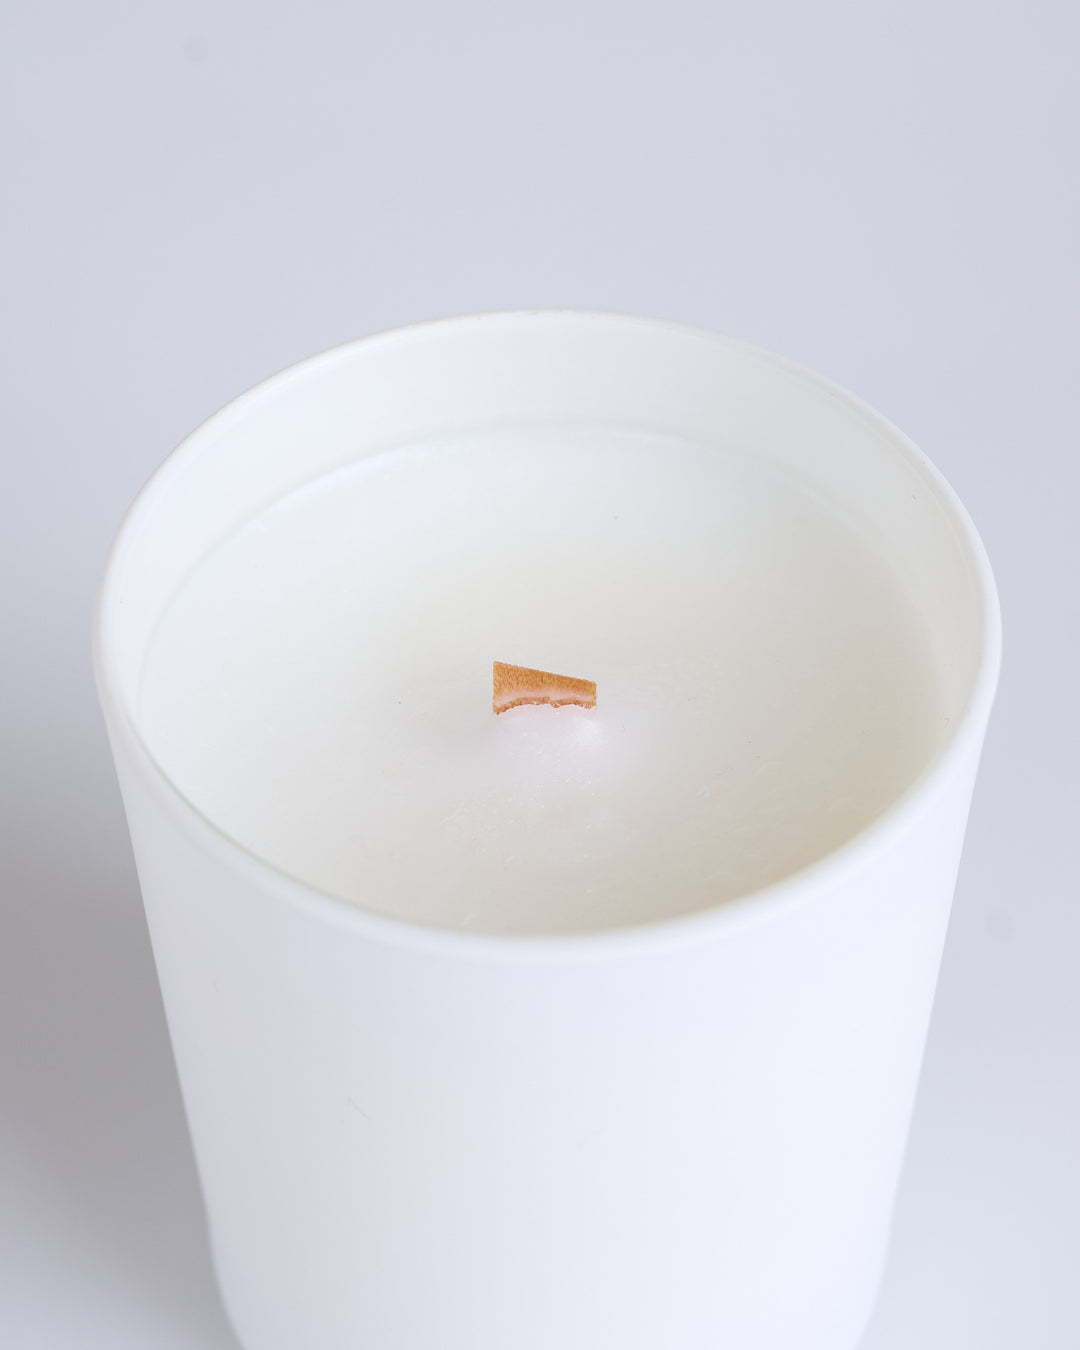 visvim Subsection Fragrance Candle No.4 Grass